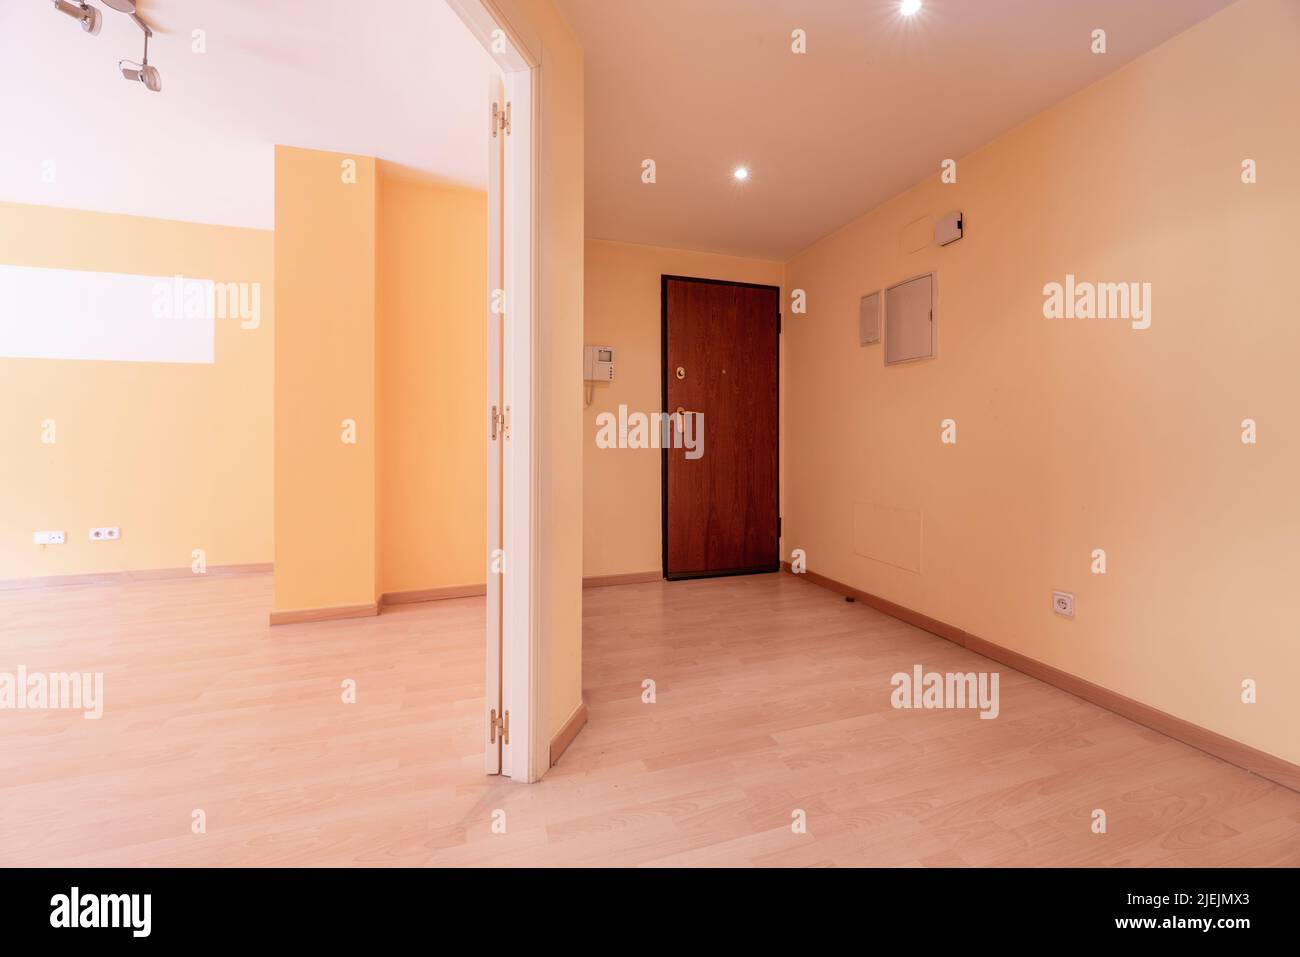 Entrance hall of a house with a wooden door, oak wood floors and light yellow painted walls with access to a larger room Stock Photo